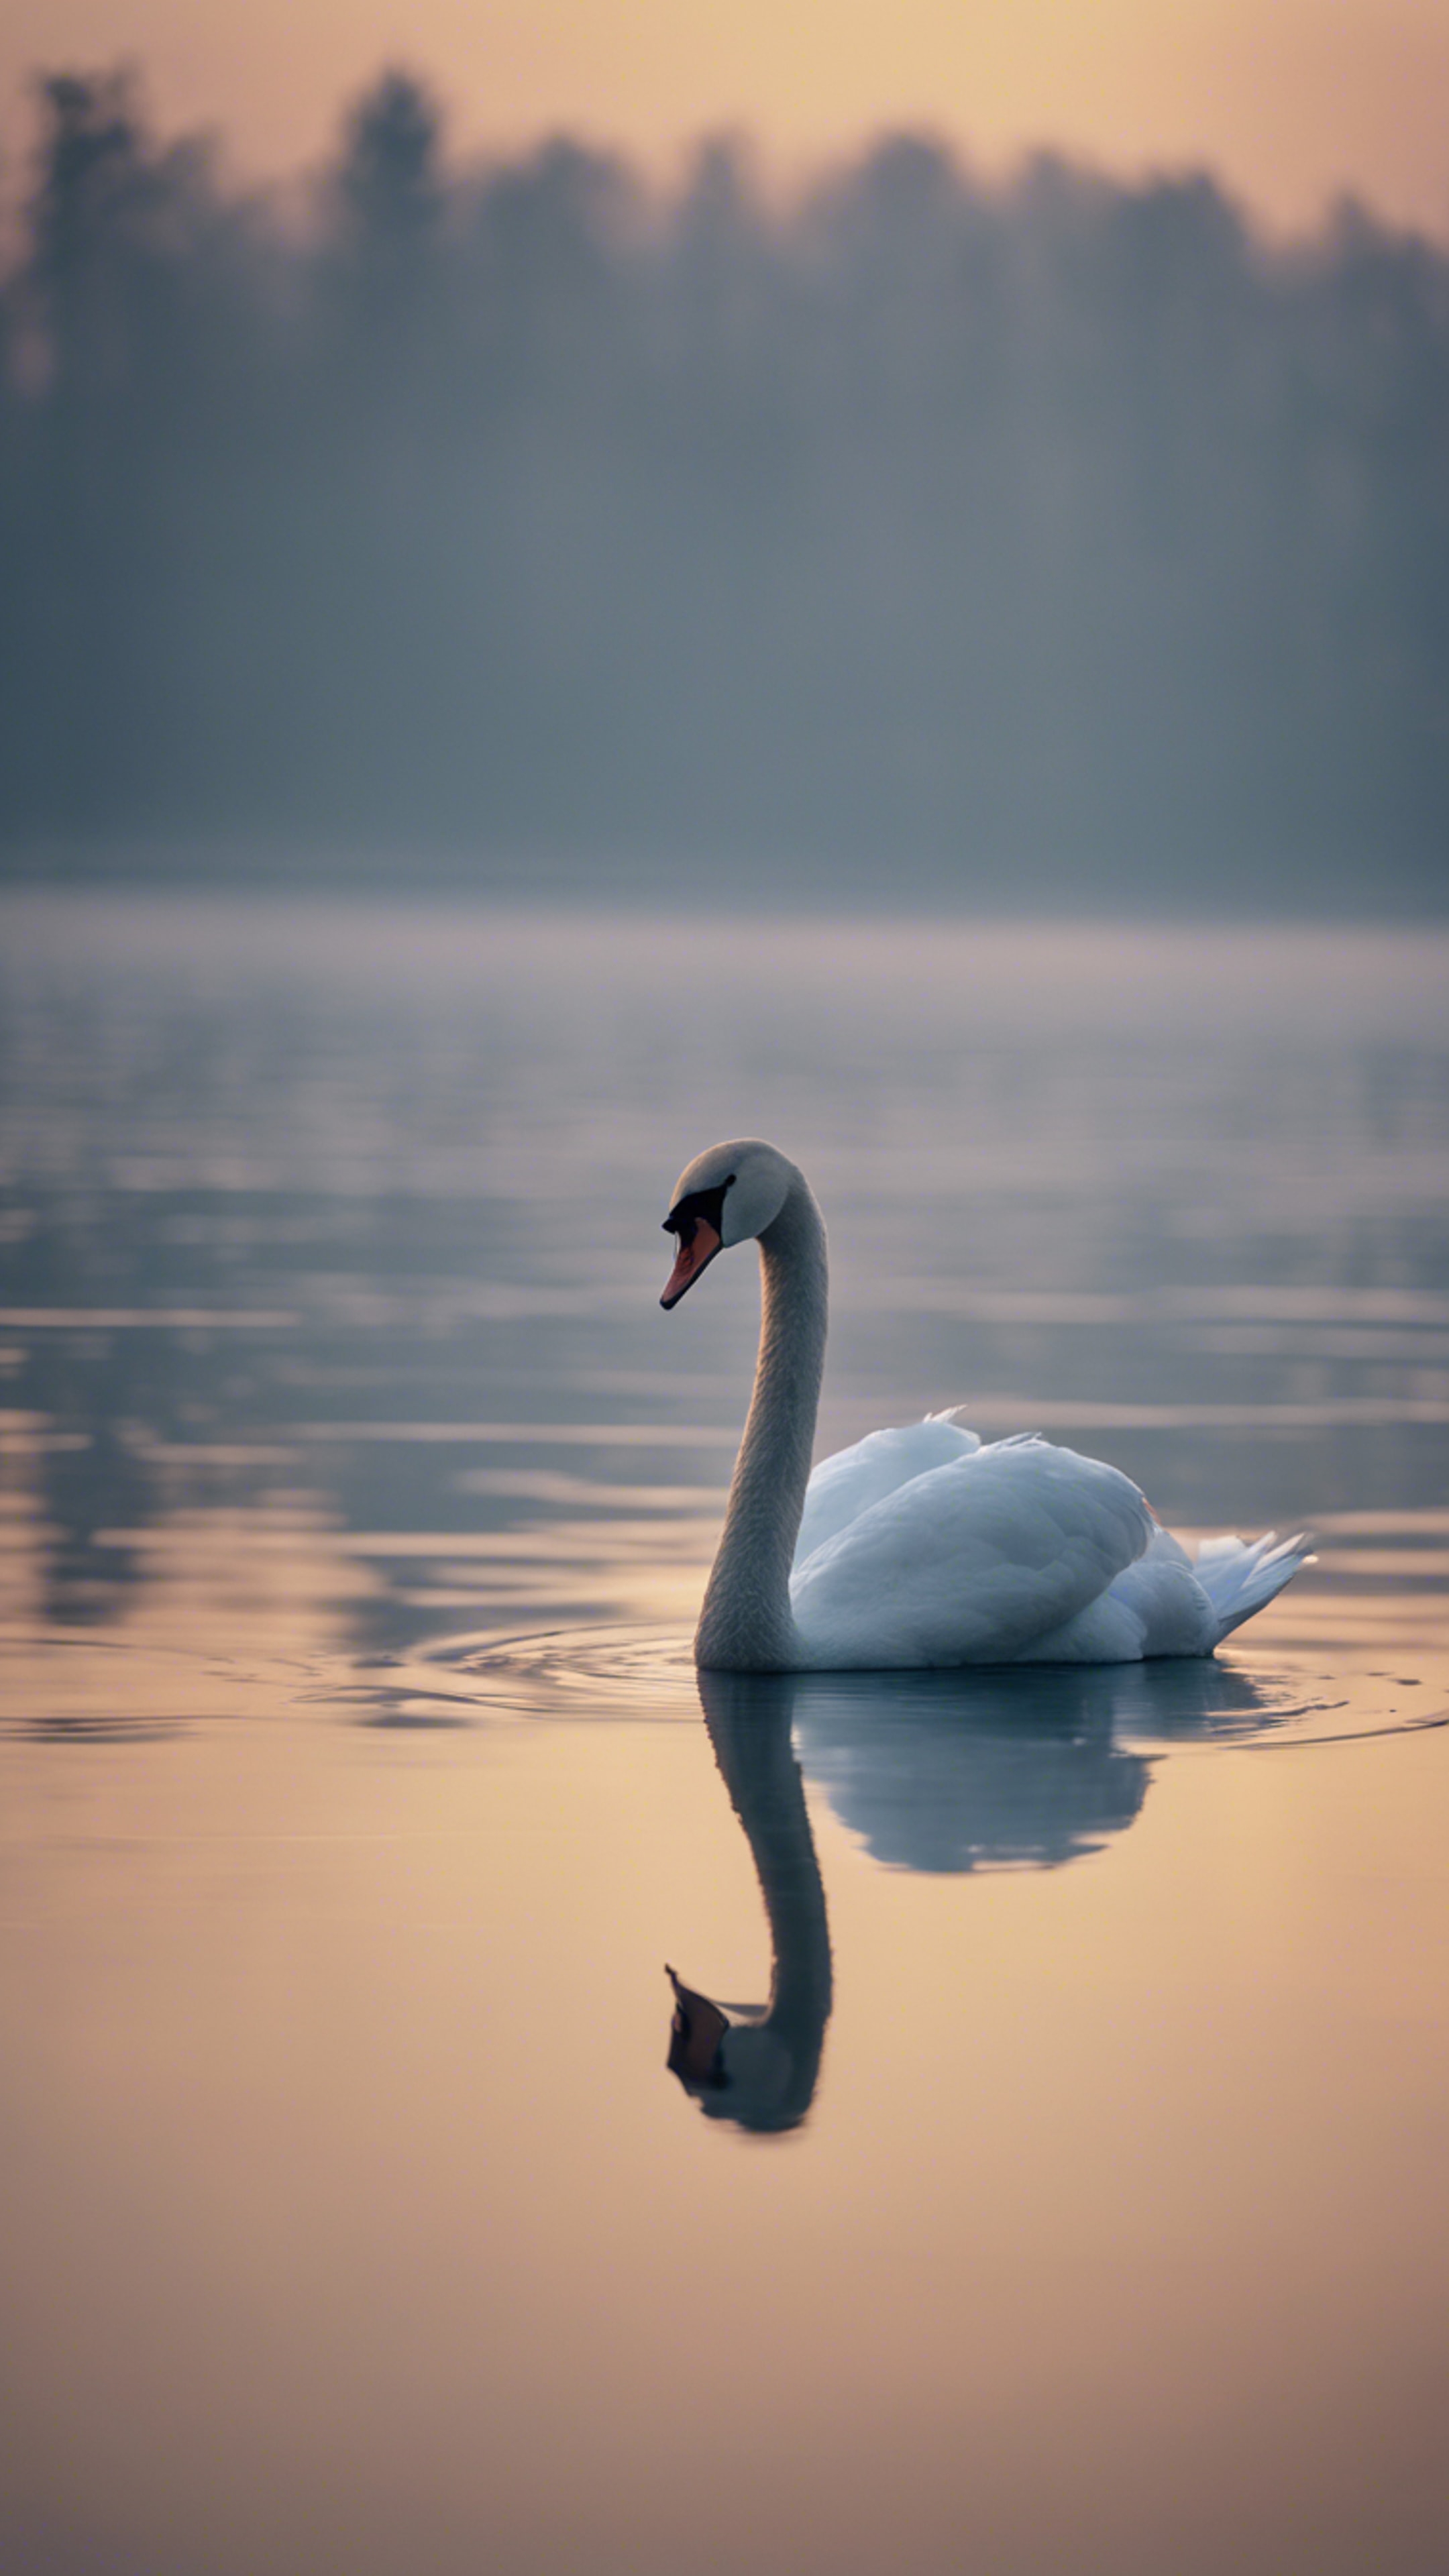 A single love-struck swan swimming alone in a desolate lake under the pallid glow of a gloomy moon. Обои[674930fc7c9f467a8426]